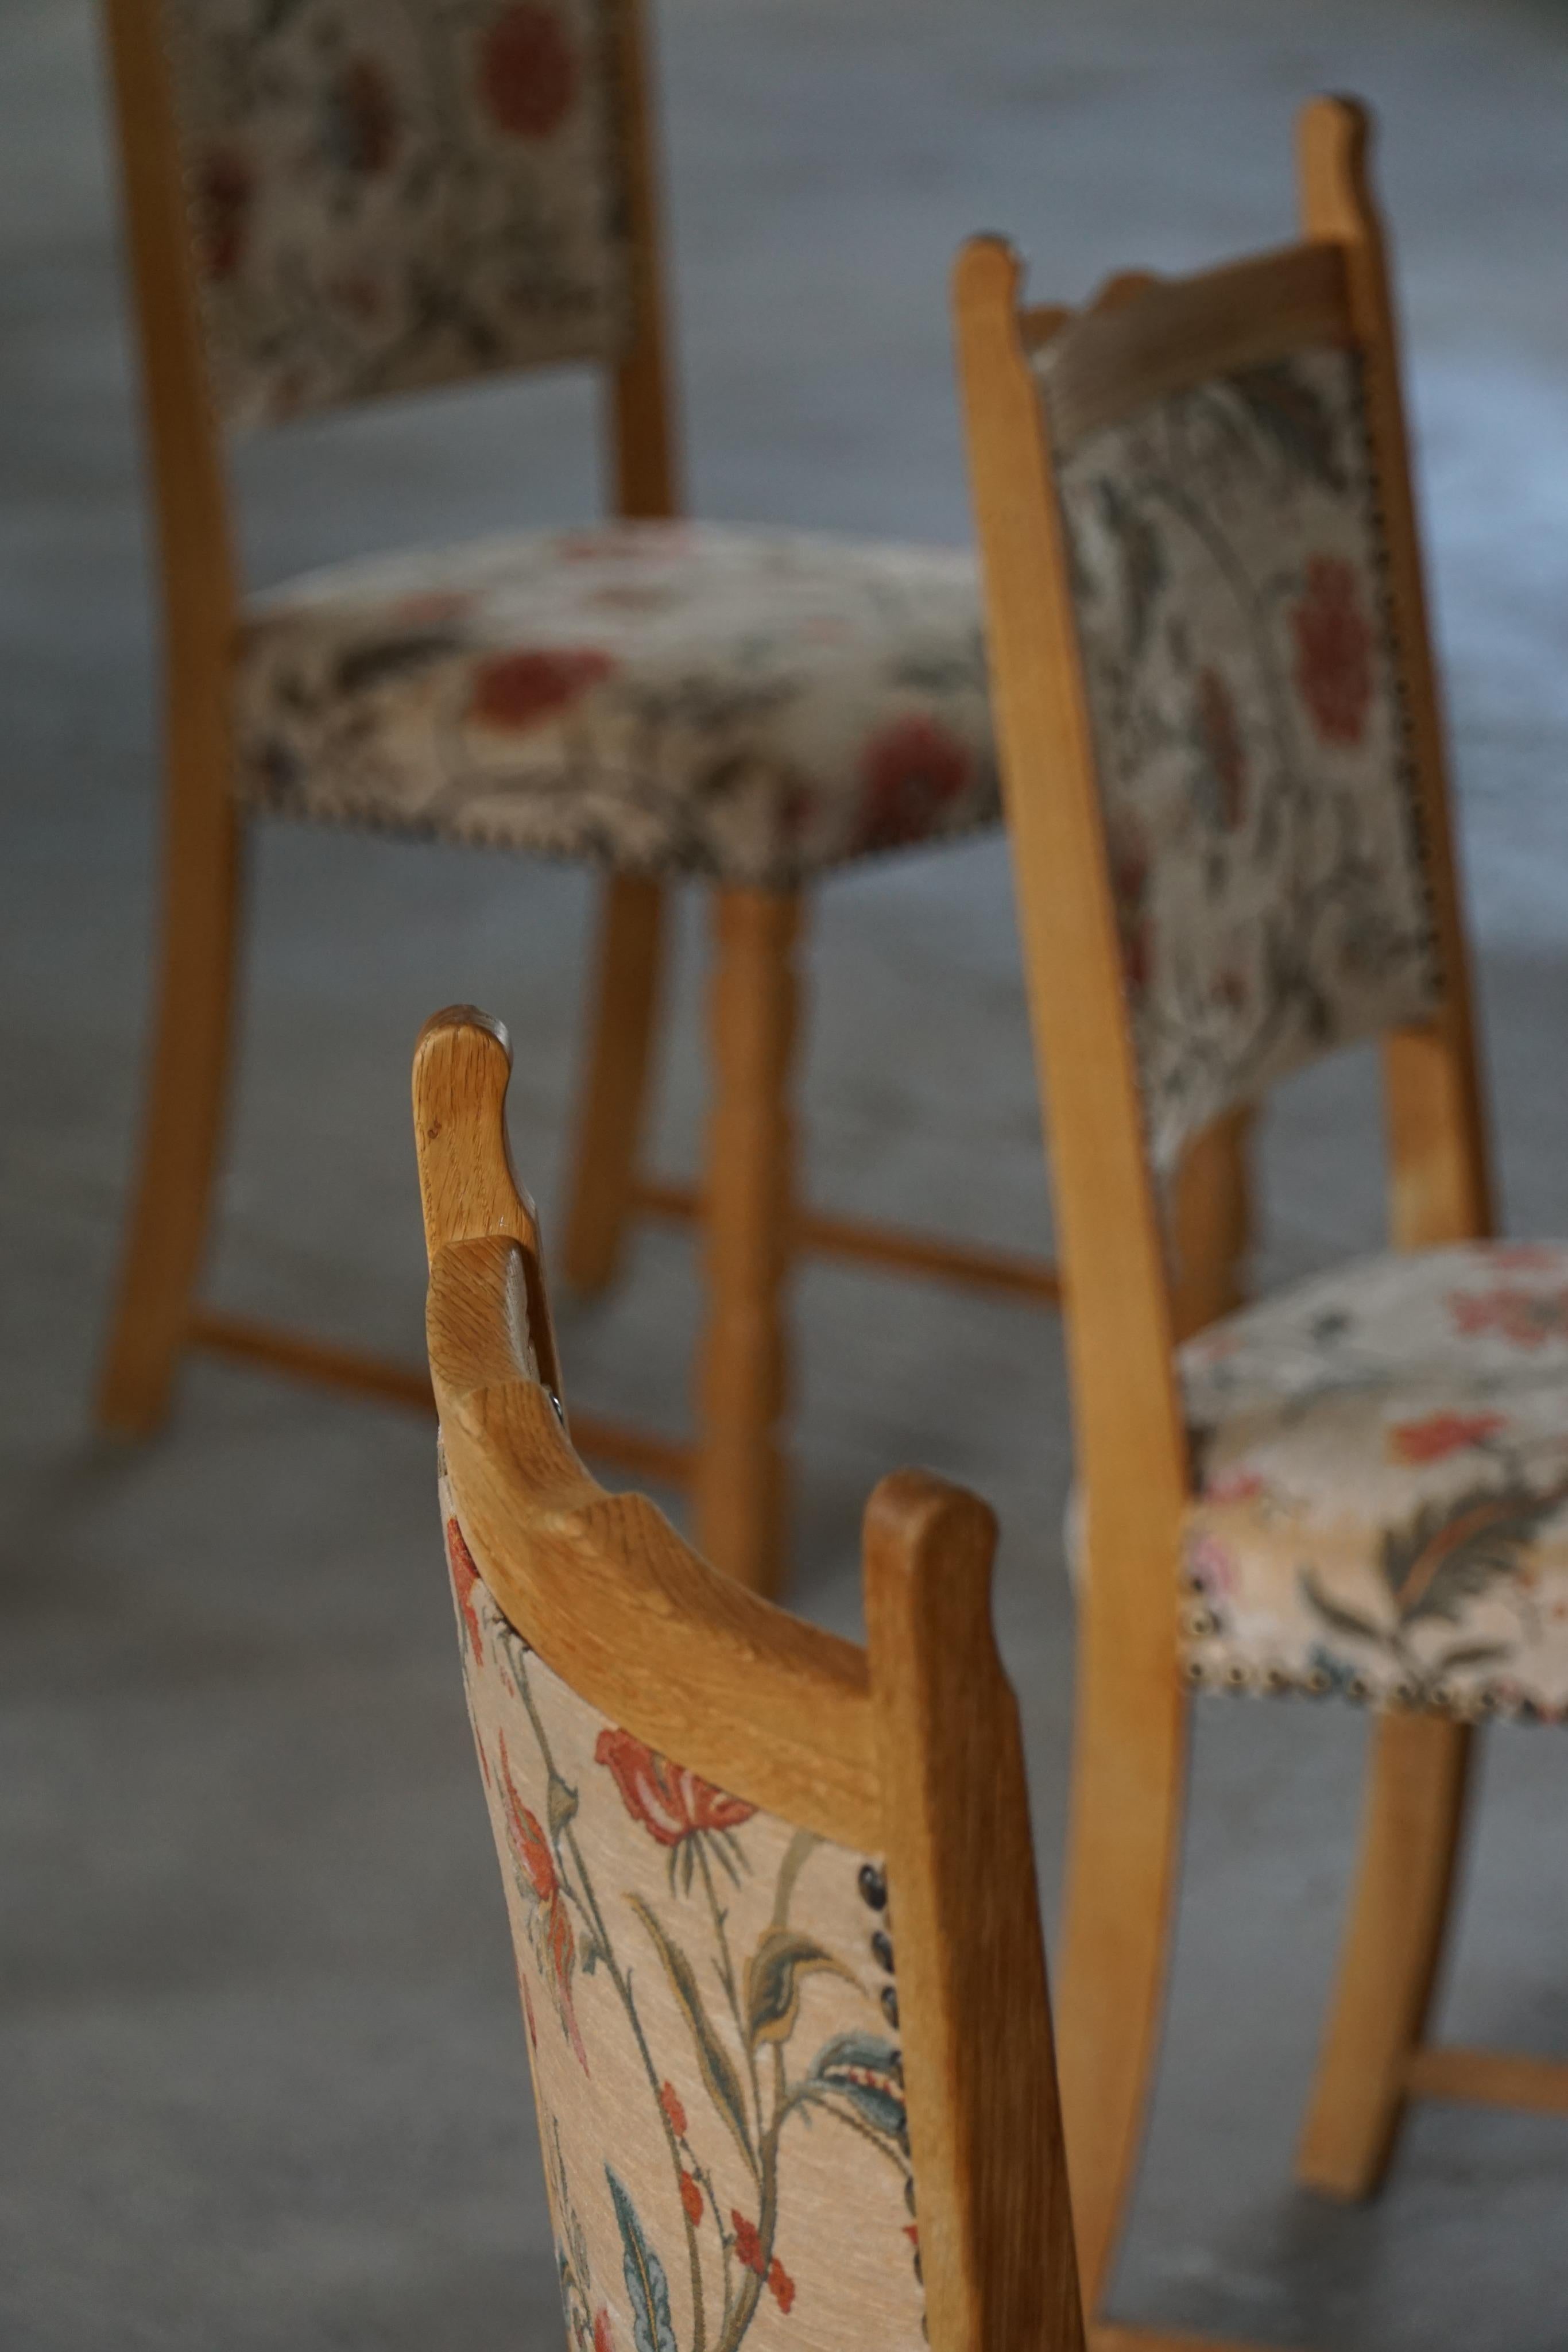 A Set of 6 Dining Room Chairs in Oak & Fabric by a Danish Cabinetmaker, 1950s For Sale 3